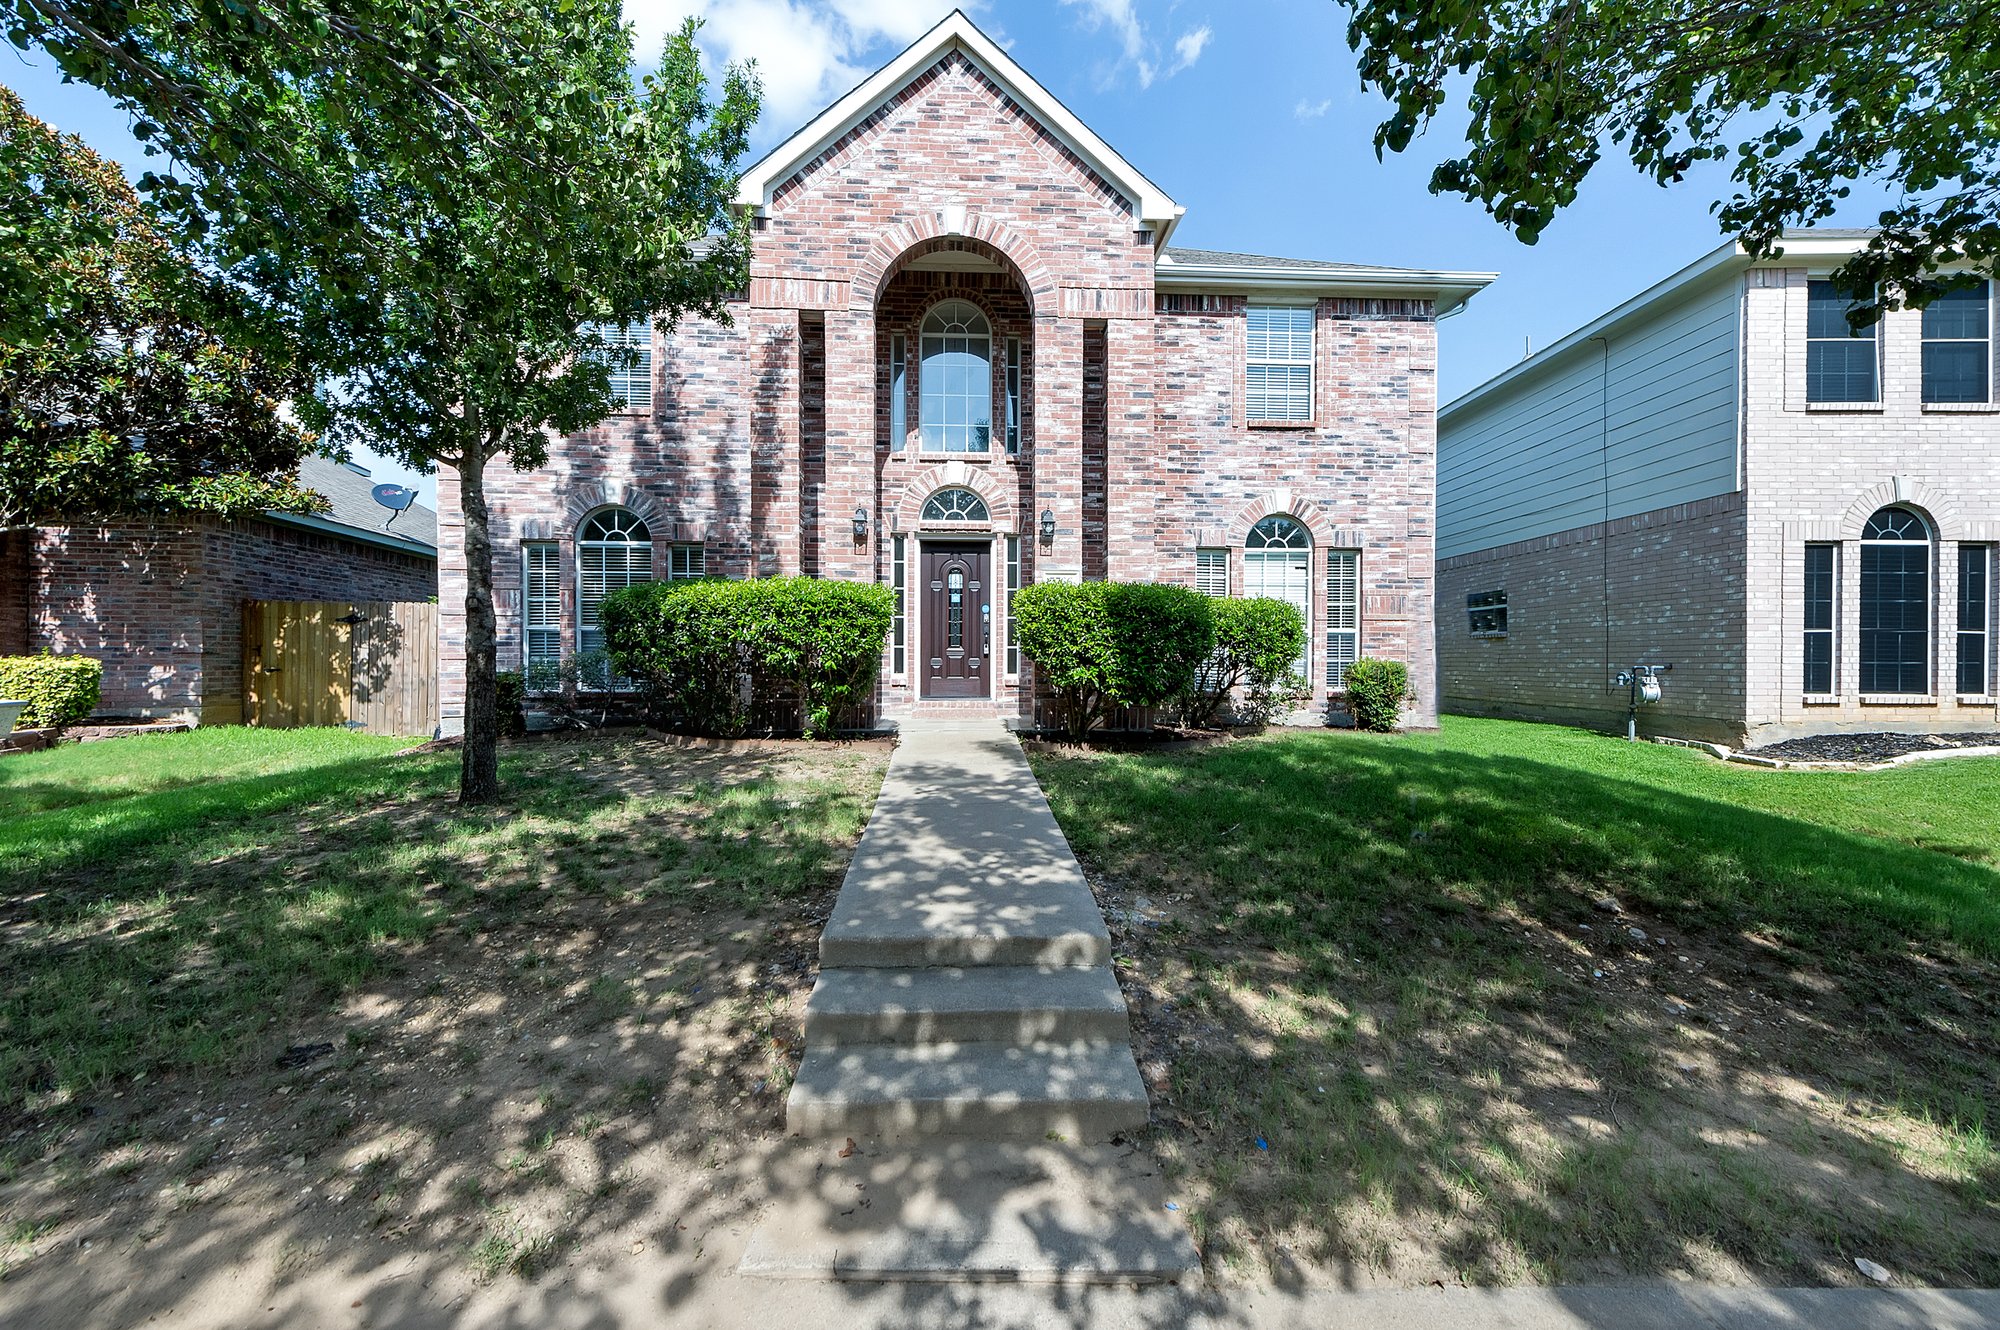 Photo 1 of 34 - 7766 Teal Dr, Fort Worth, TX 76137